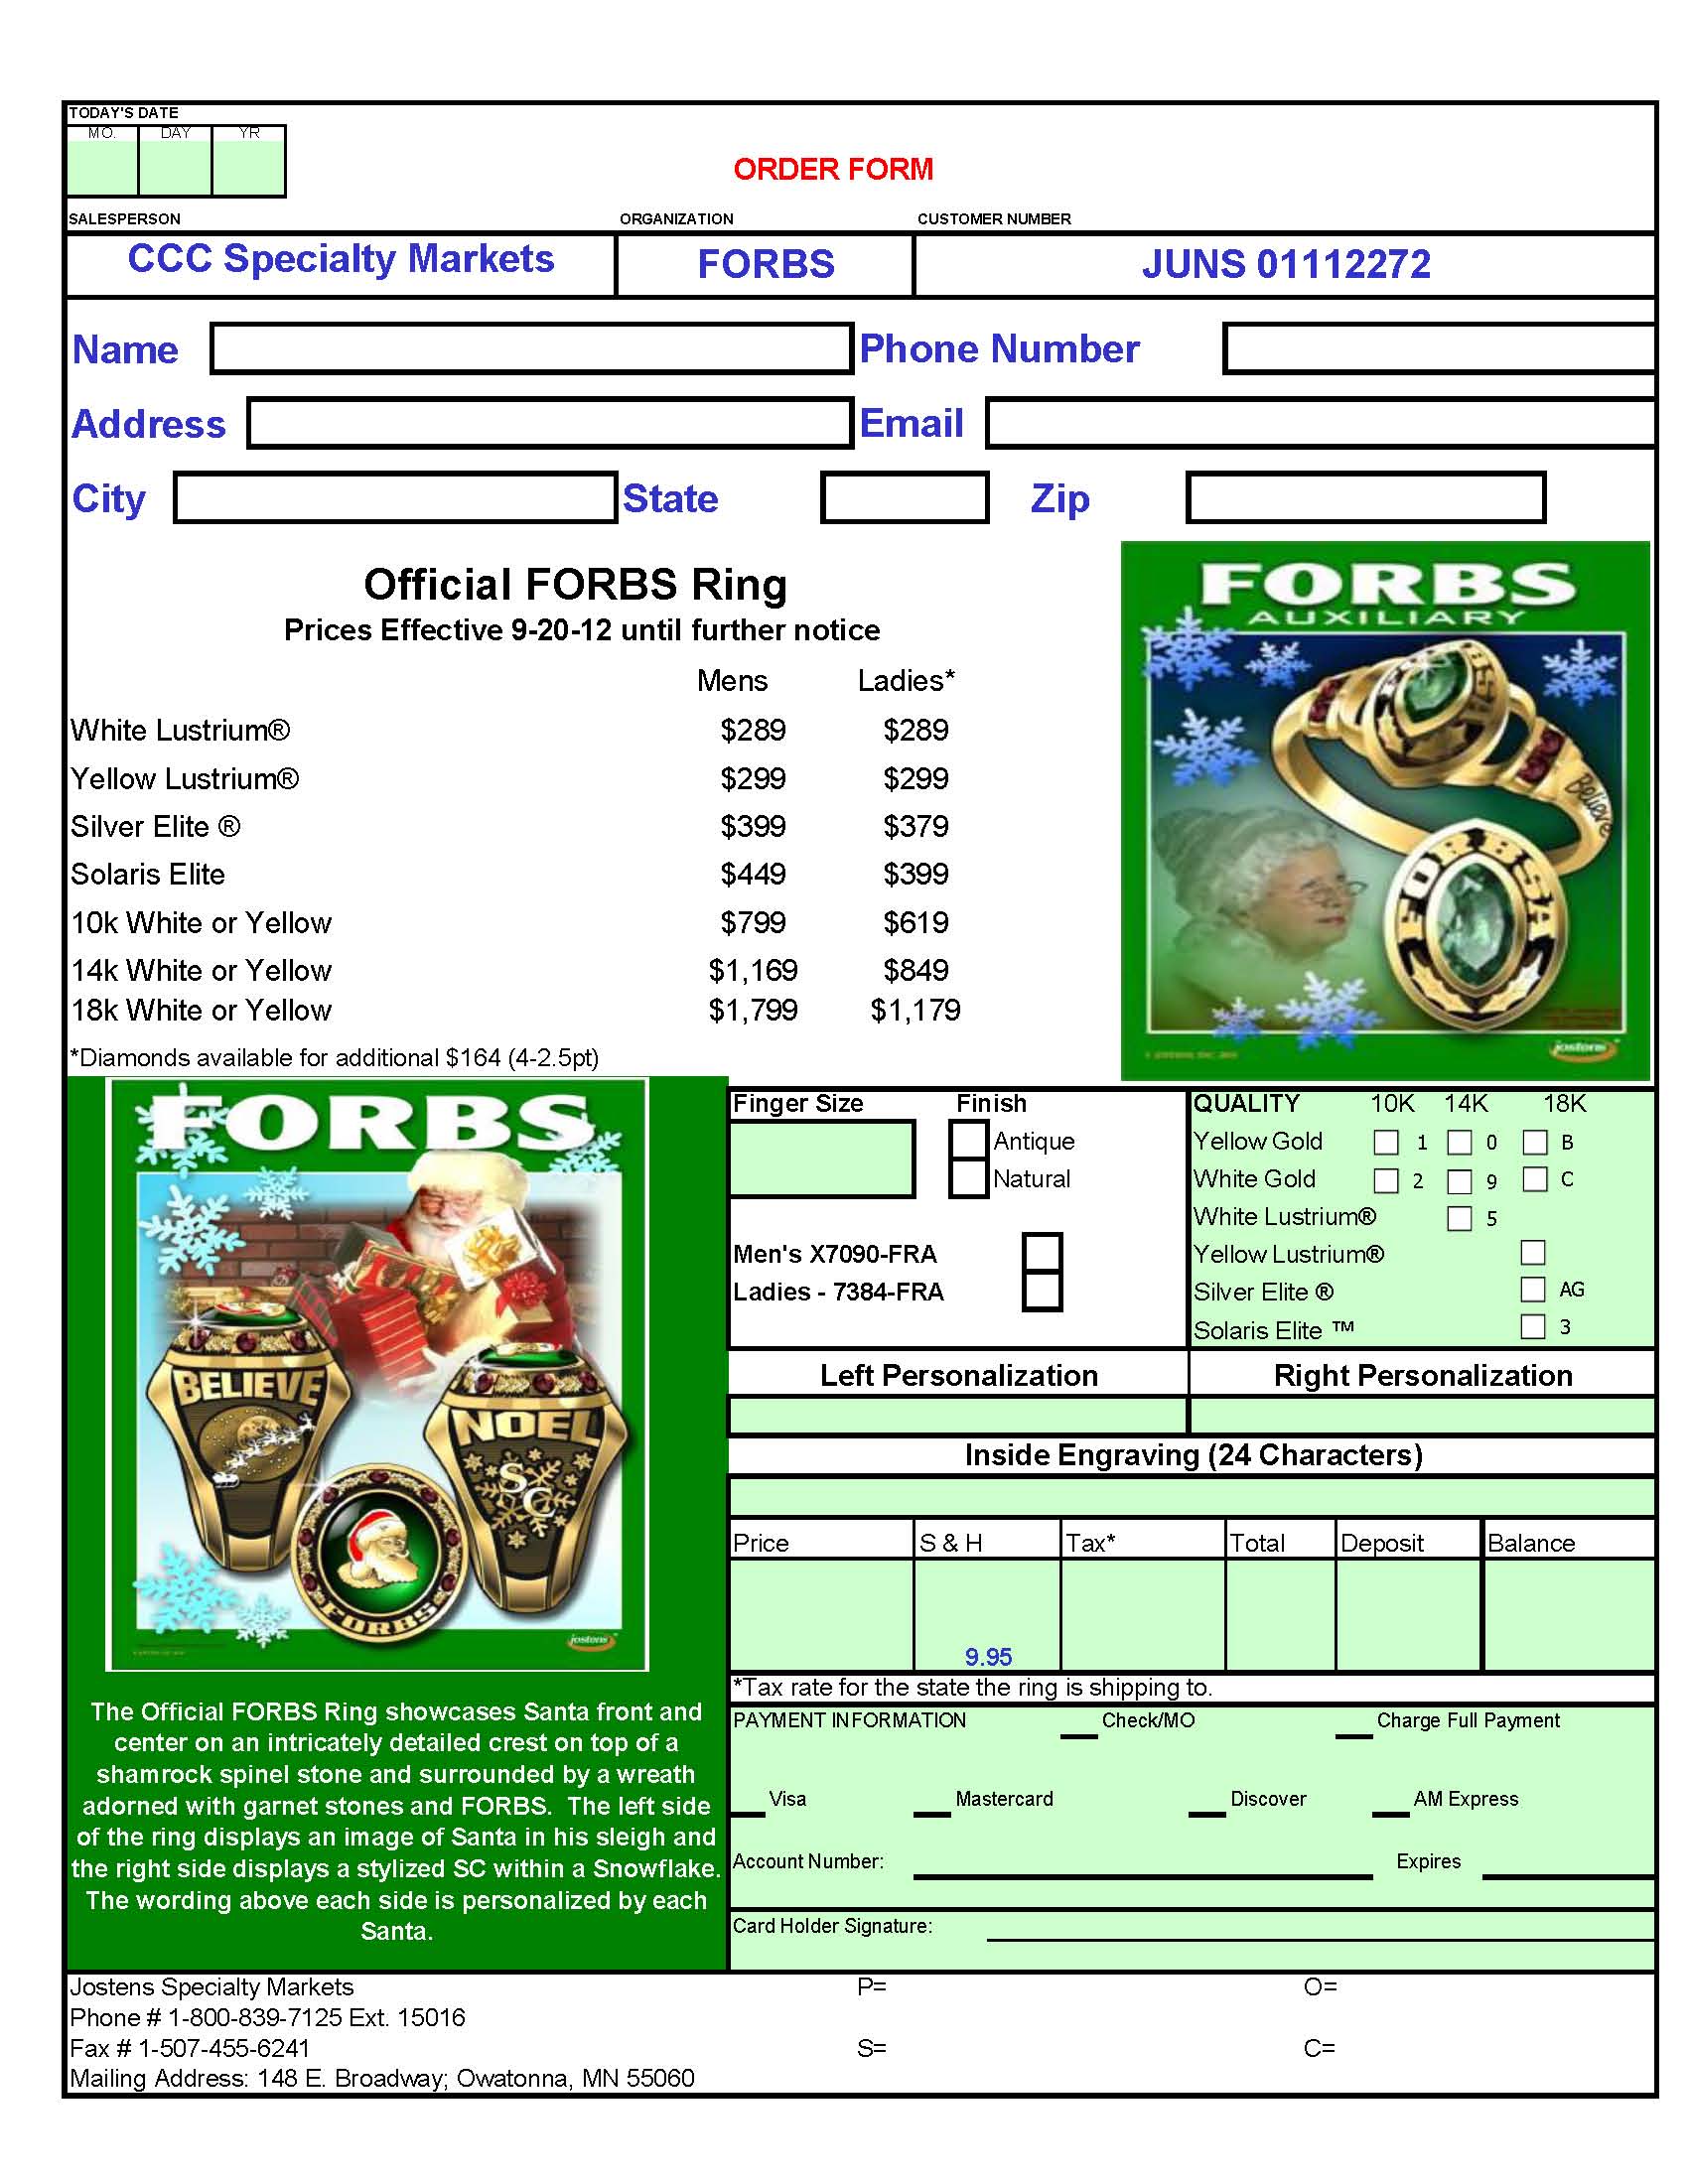 Jostens Order Form - FORBS Ring